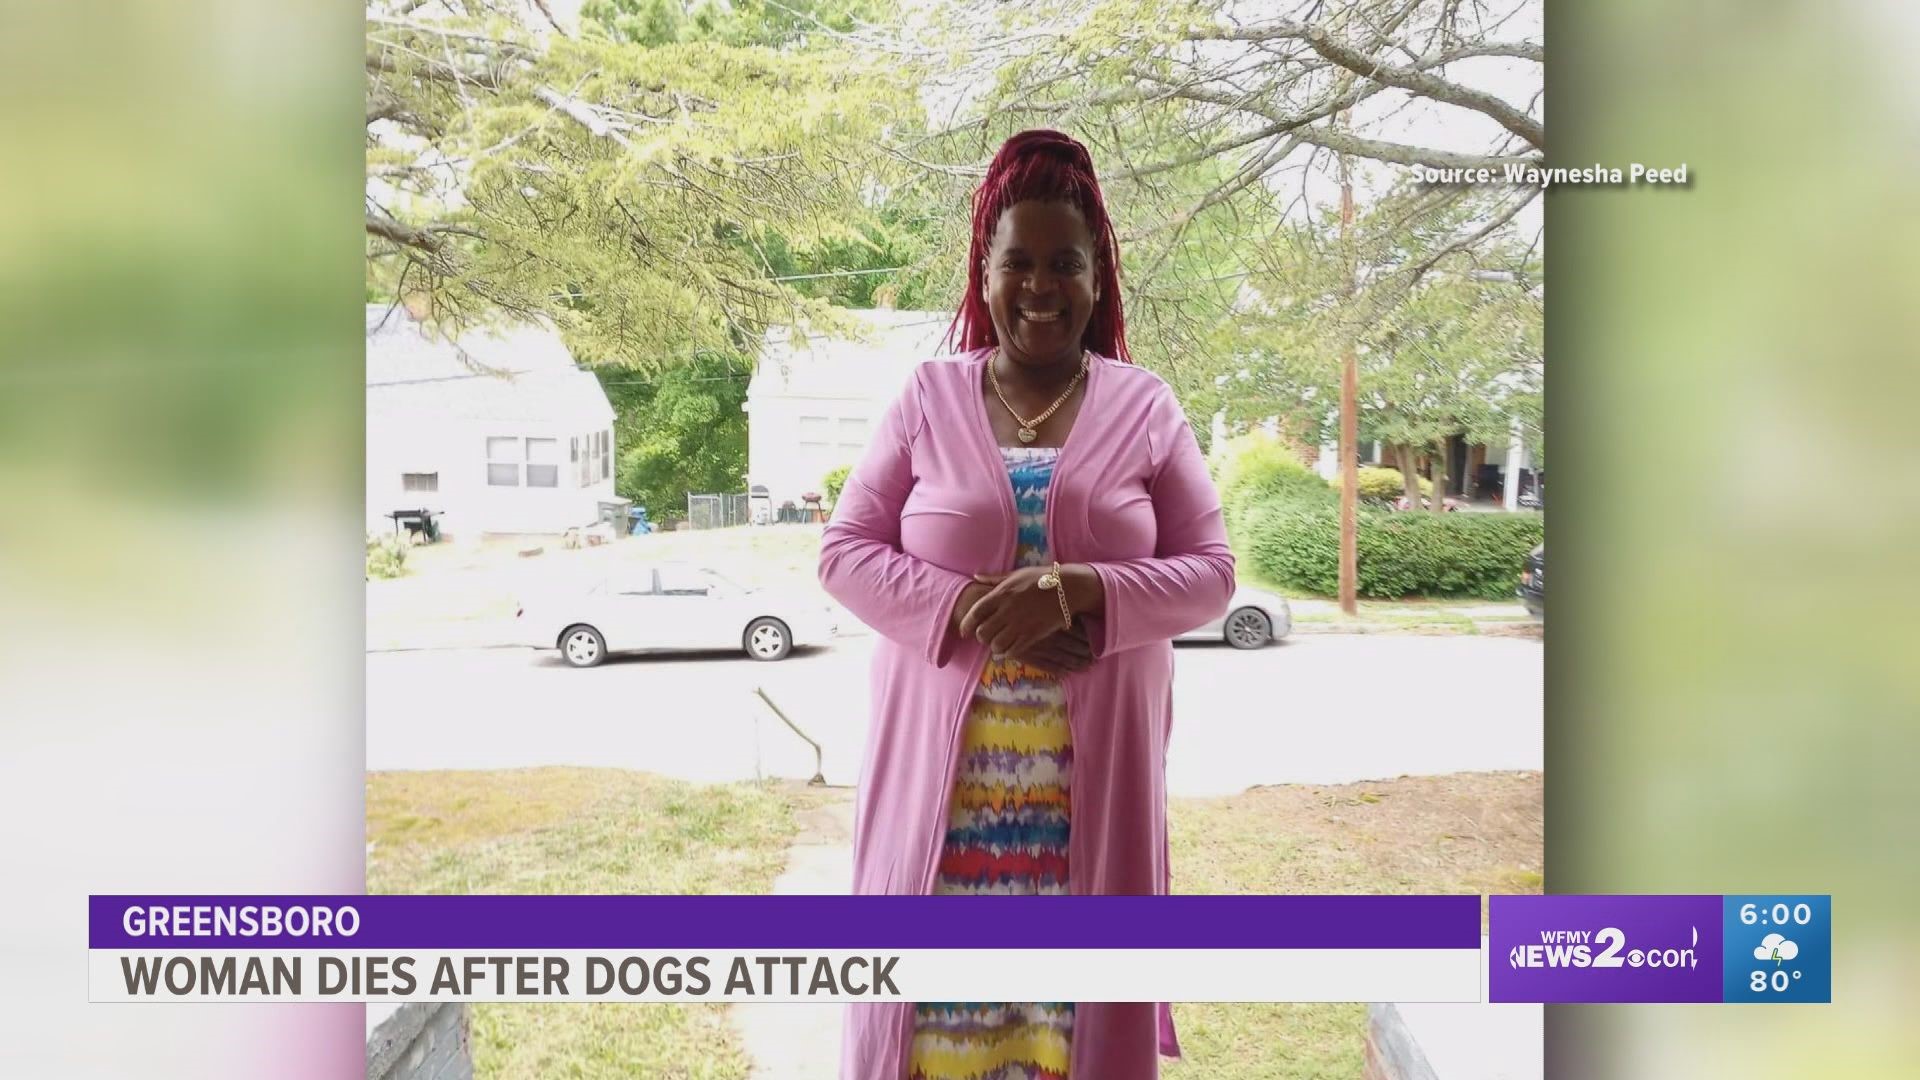 Police said two dogs attacked a woman who was dog-sitting them for a family member.